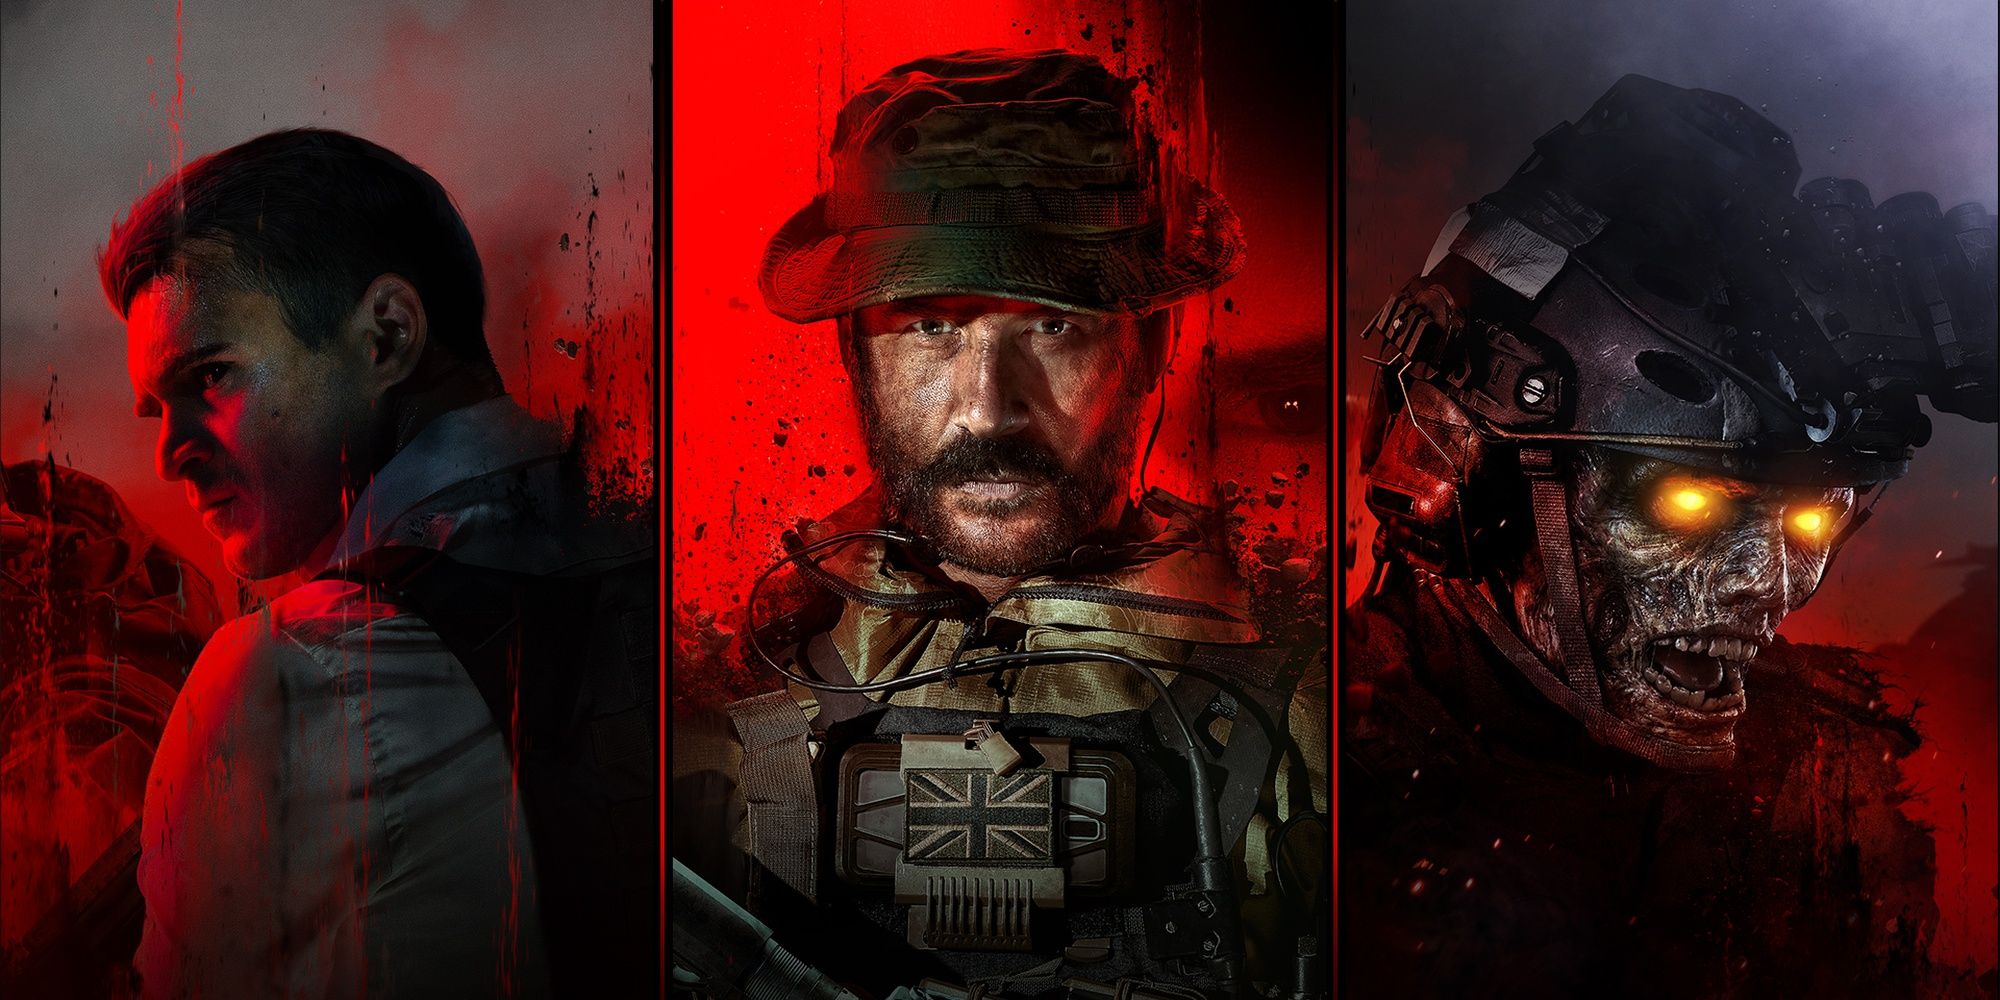 Call of Duty Modern Warfare 3 2023 Collage Of Price, Makarov, And Zombie Soldier